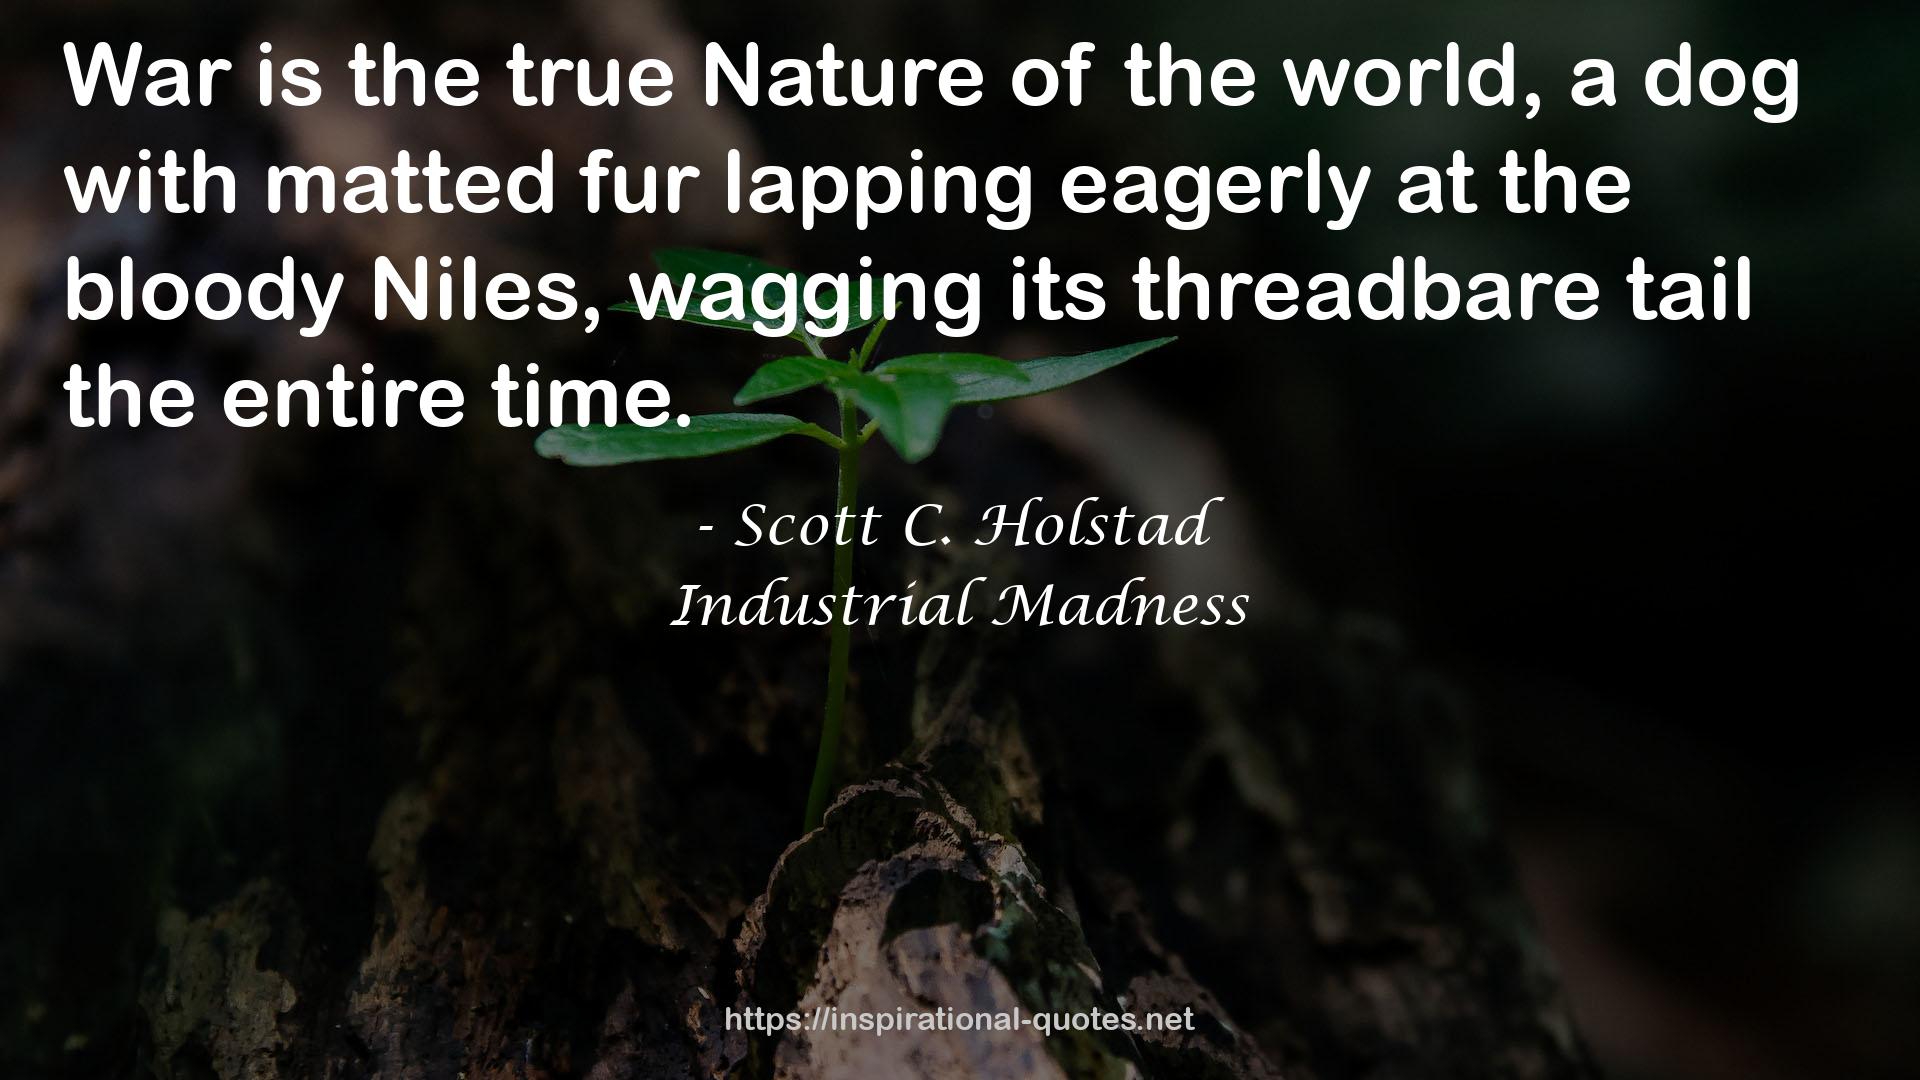 Industrial Madness QUOTES